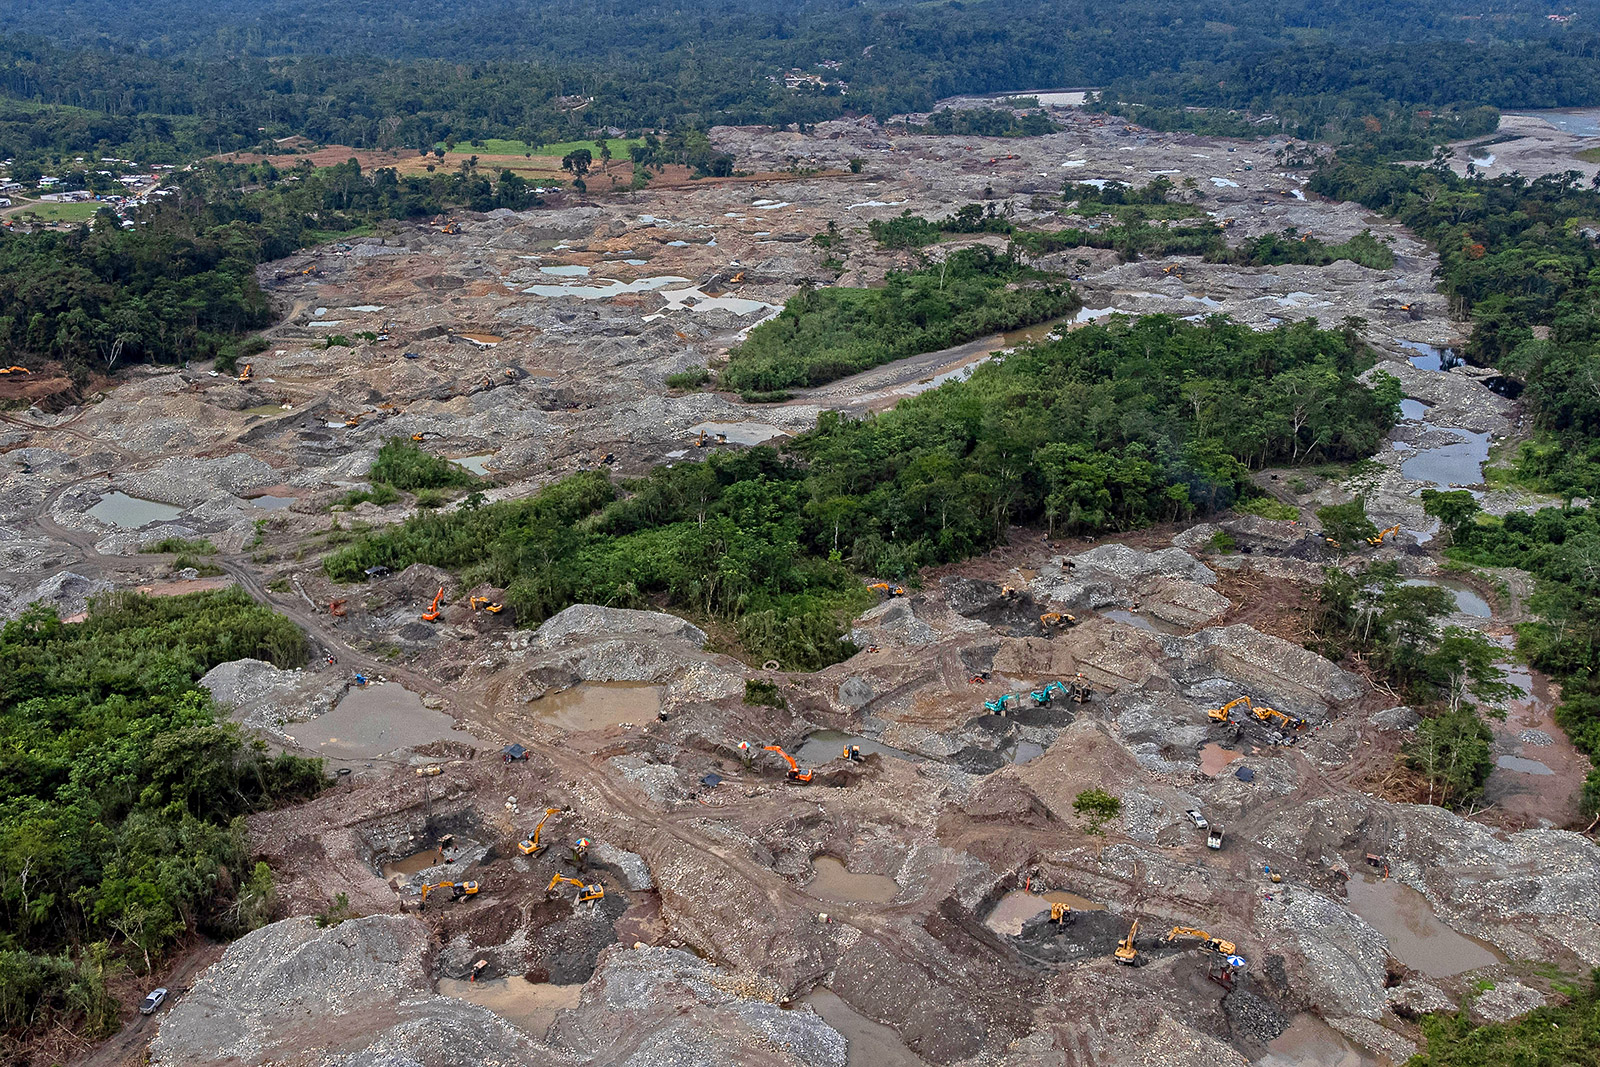 Aerial image showing the destruction of the upper Amazon rainforest due to gold mining